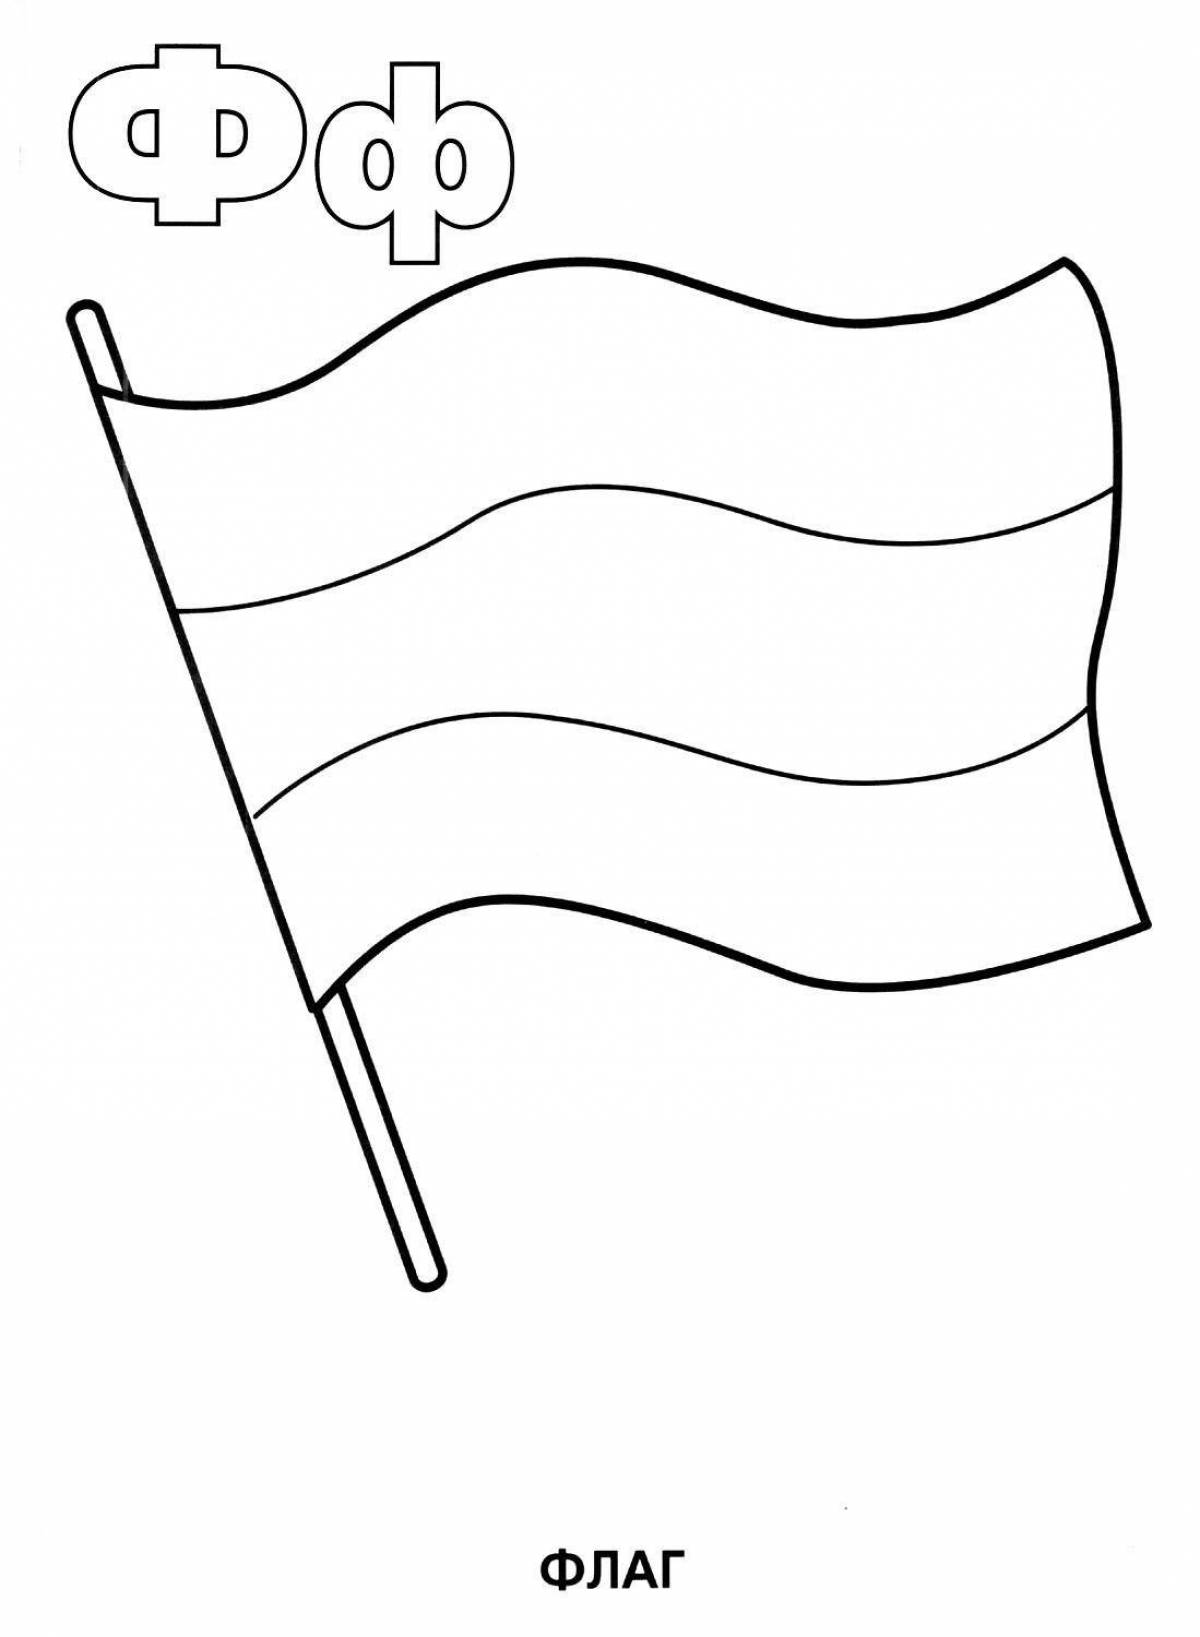 A fun Russian flag coloring page for kids